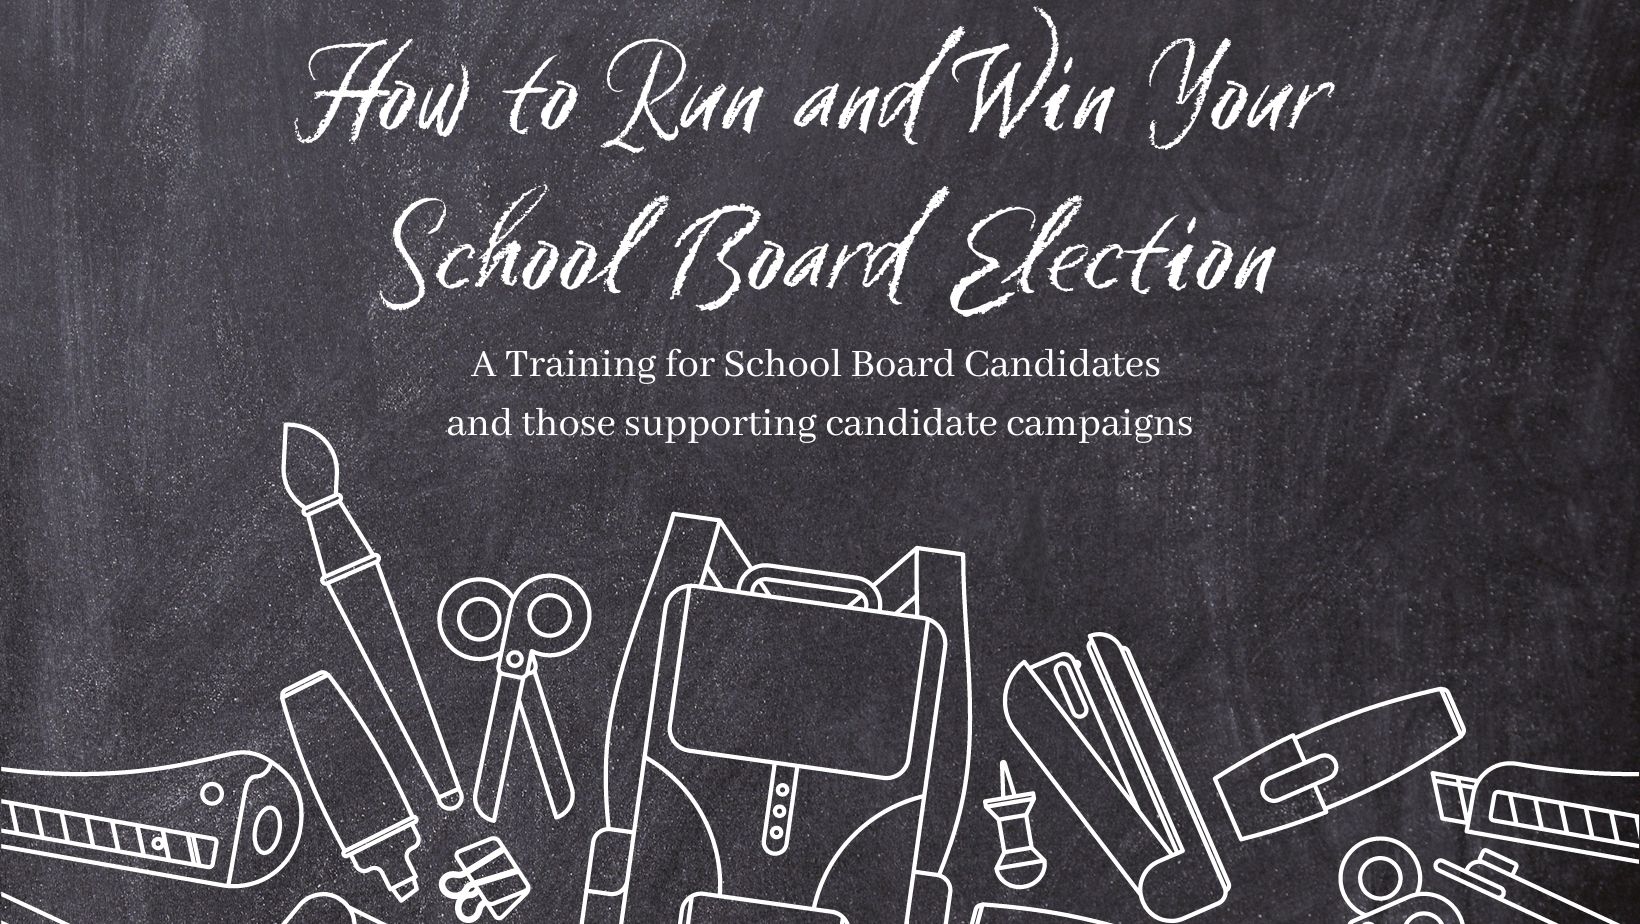 How to Run and Win Your School Board Election